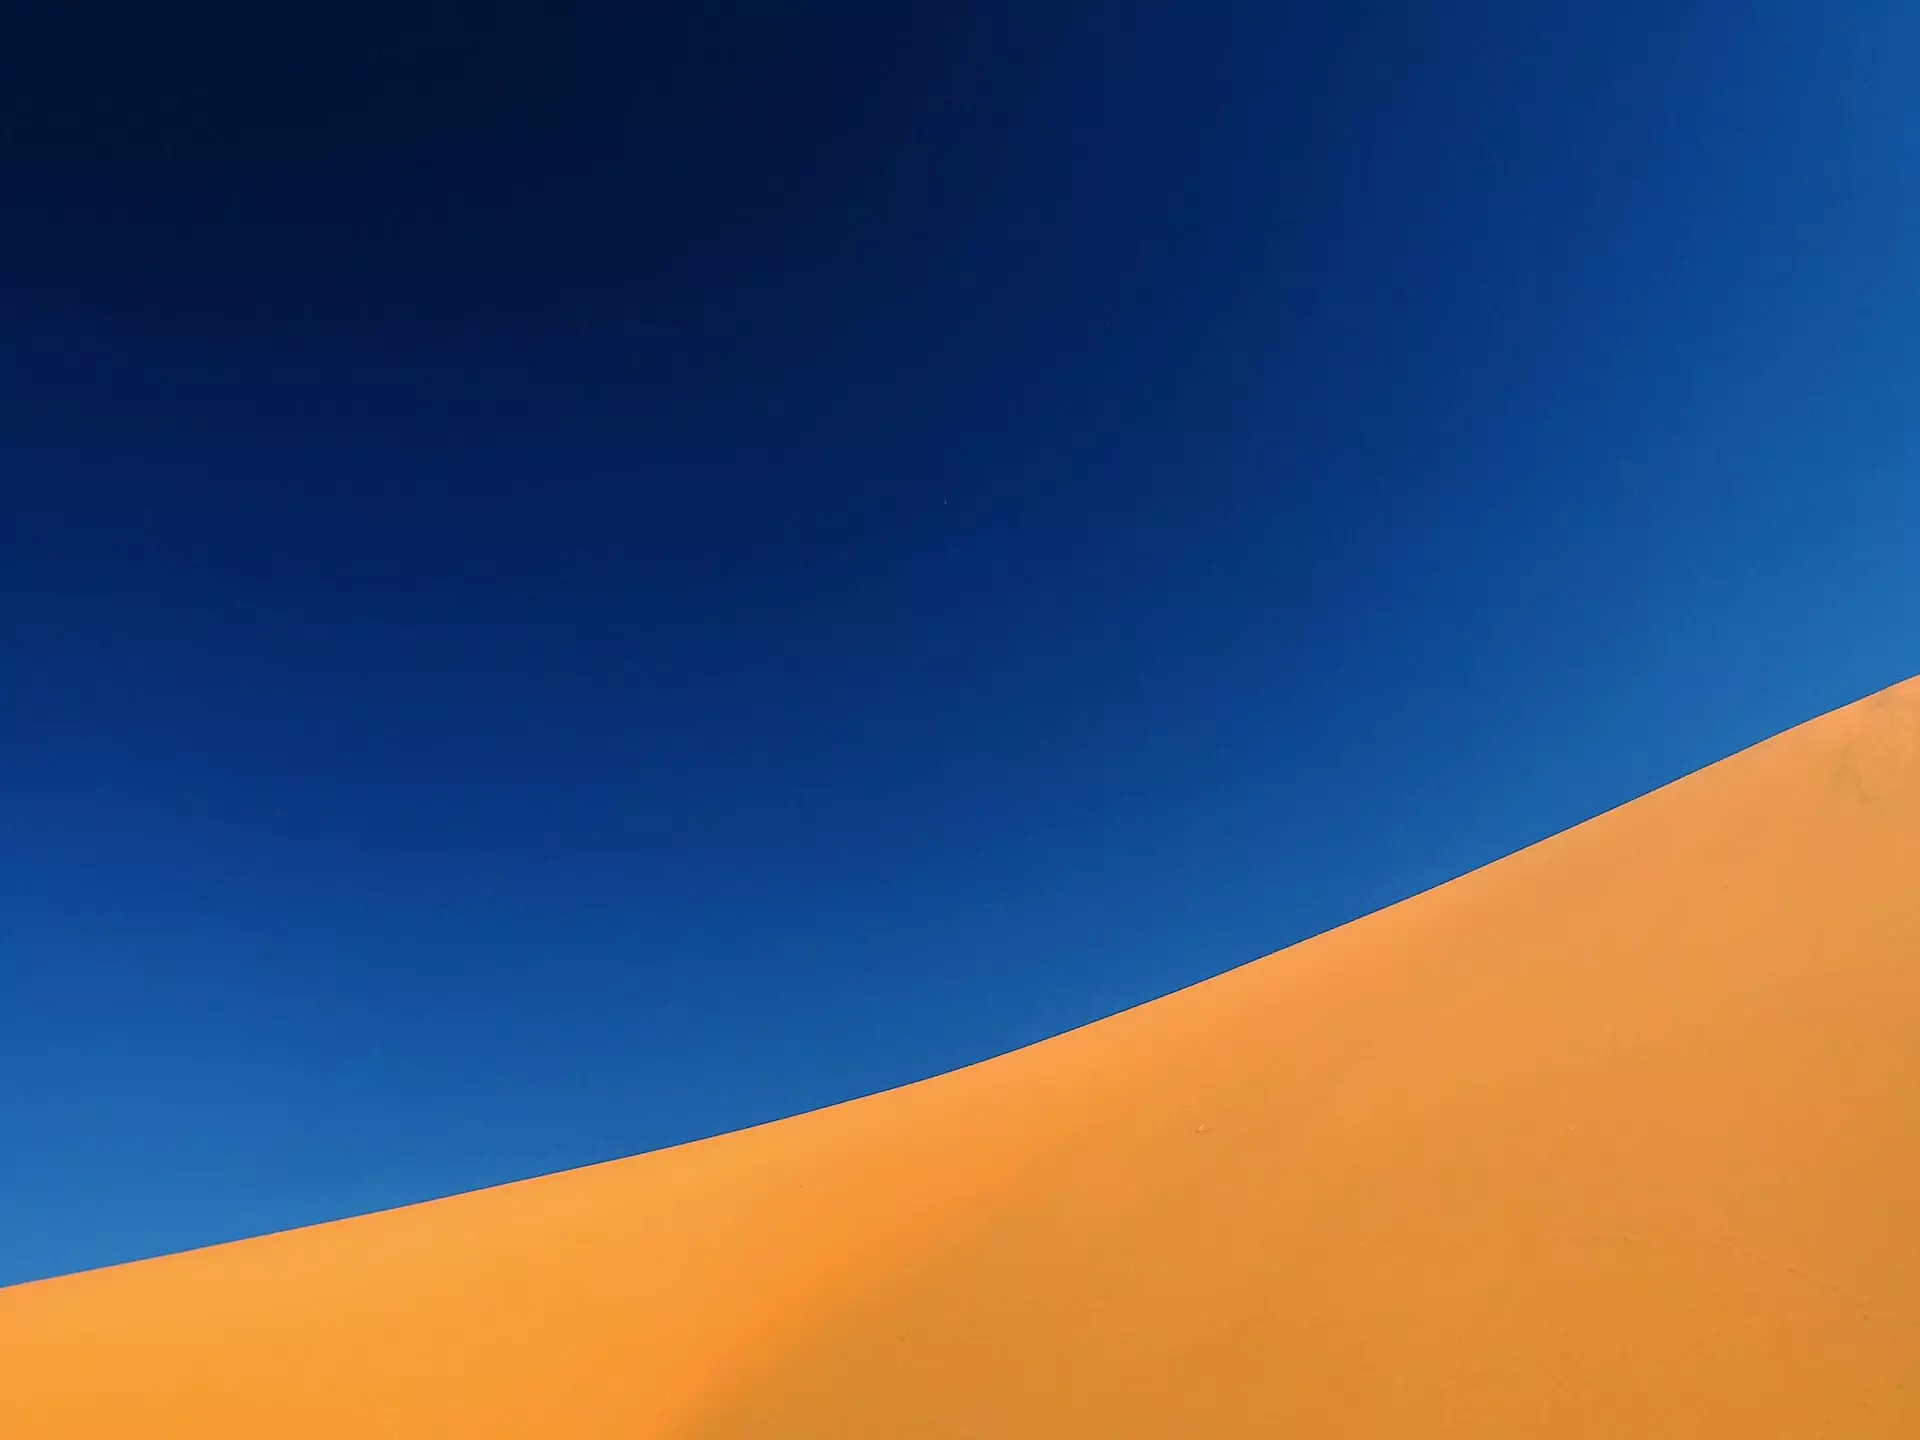 The slope of a sand dune against deep blue sky